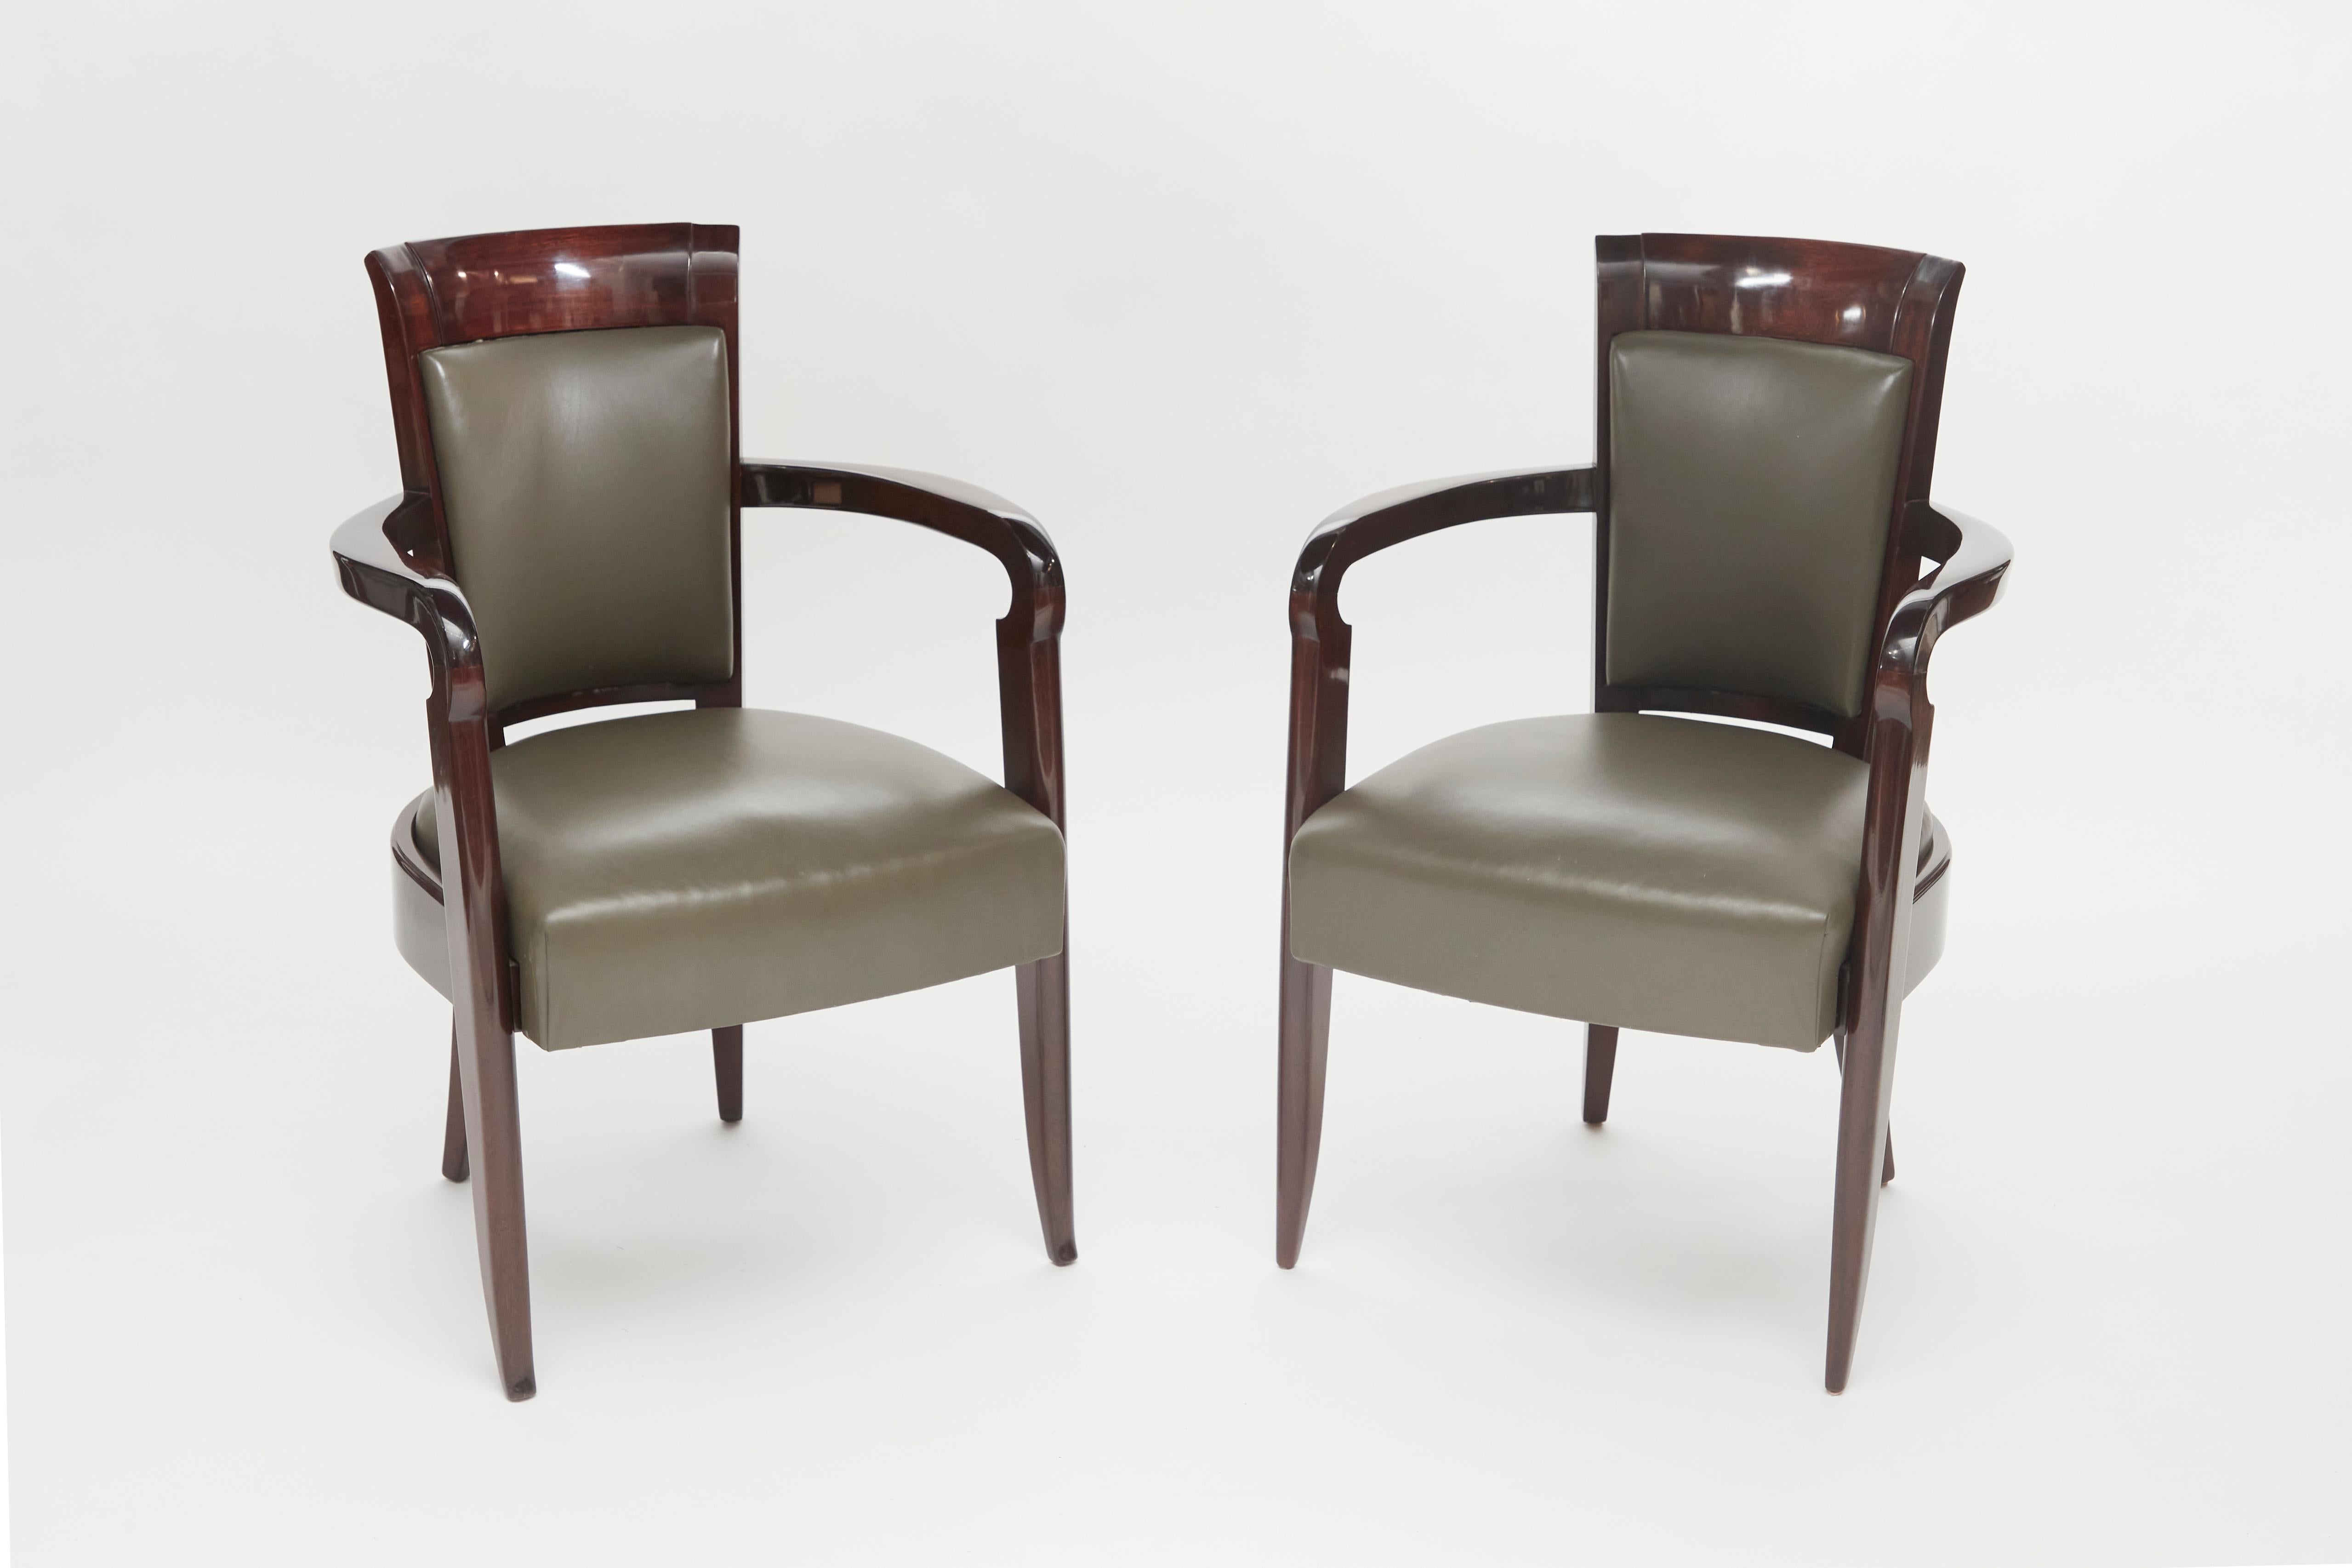 This pair of chairs features delicately splayed legs, high backs, and well-distanced, curvaceous arms. The style reflects the designer's many commissions for luxury ocean liners such as the SS Normandie.